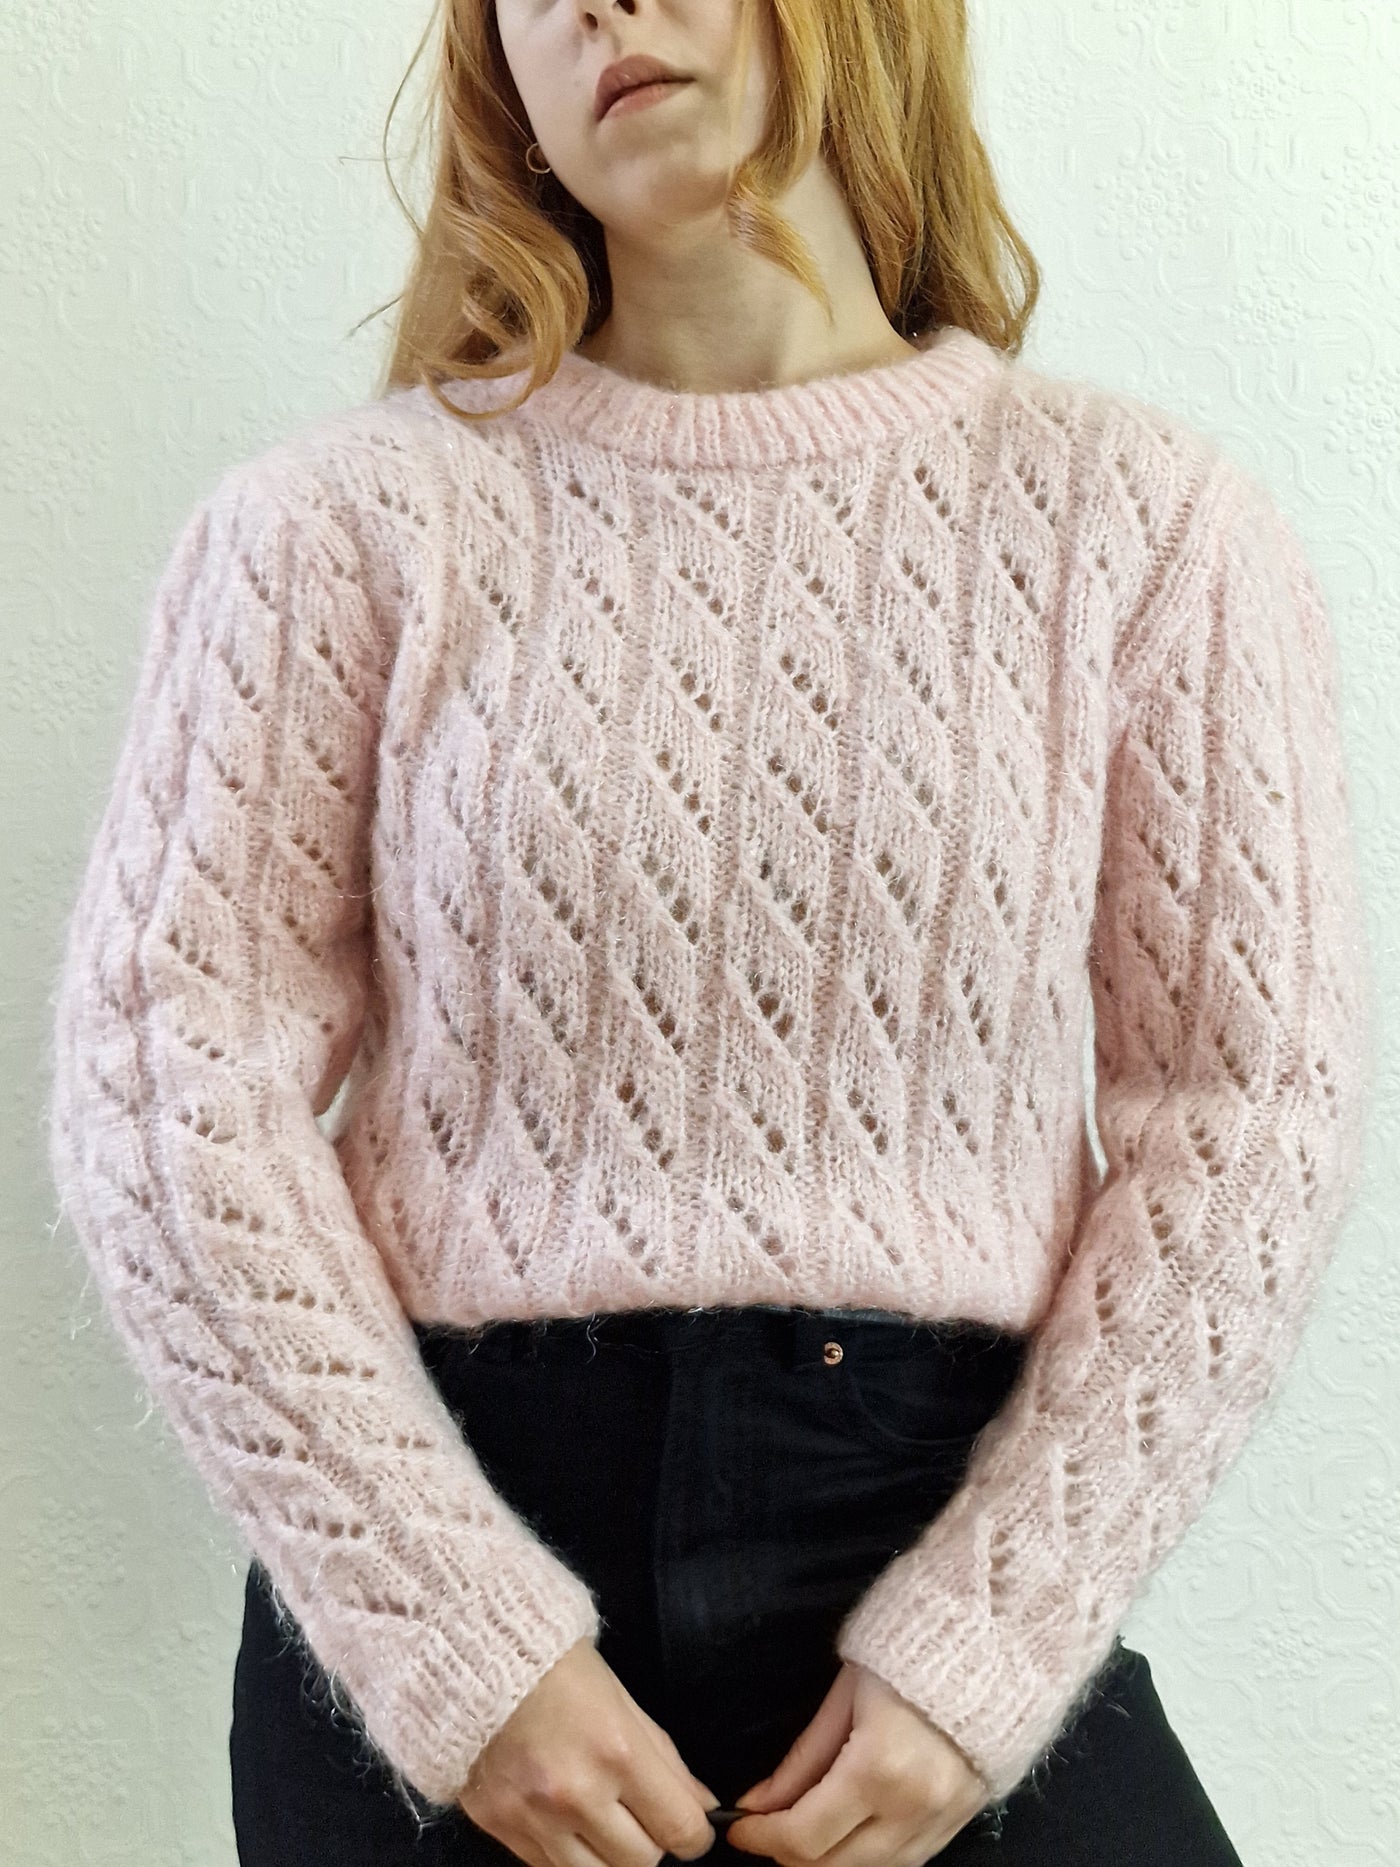 Vintage 80s Handknitted Pink Mohair Jumper with Crew Neck - S/M